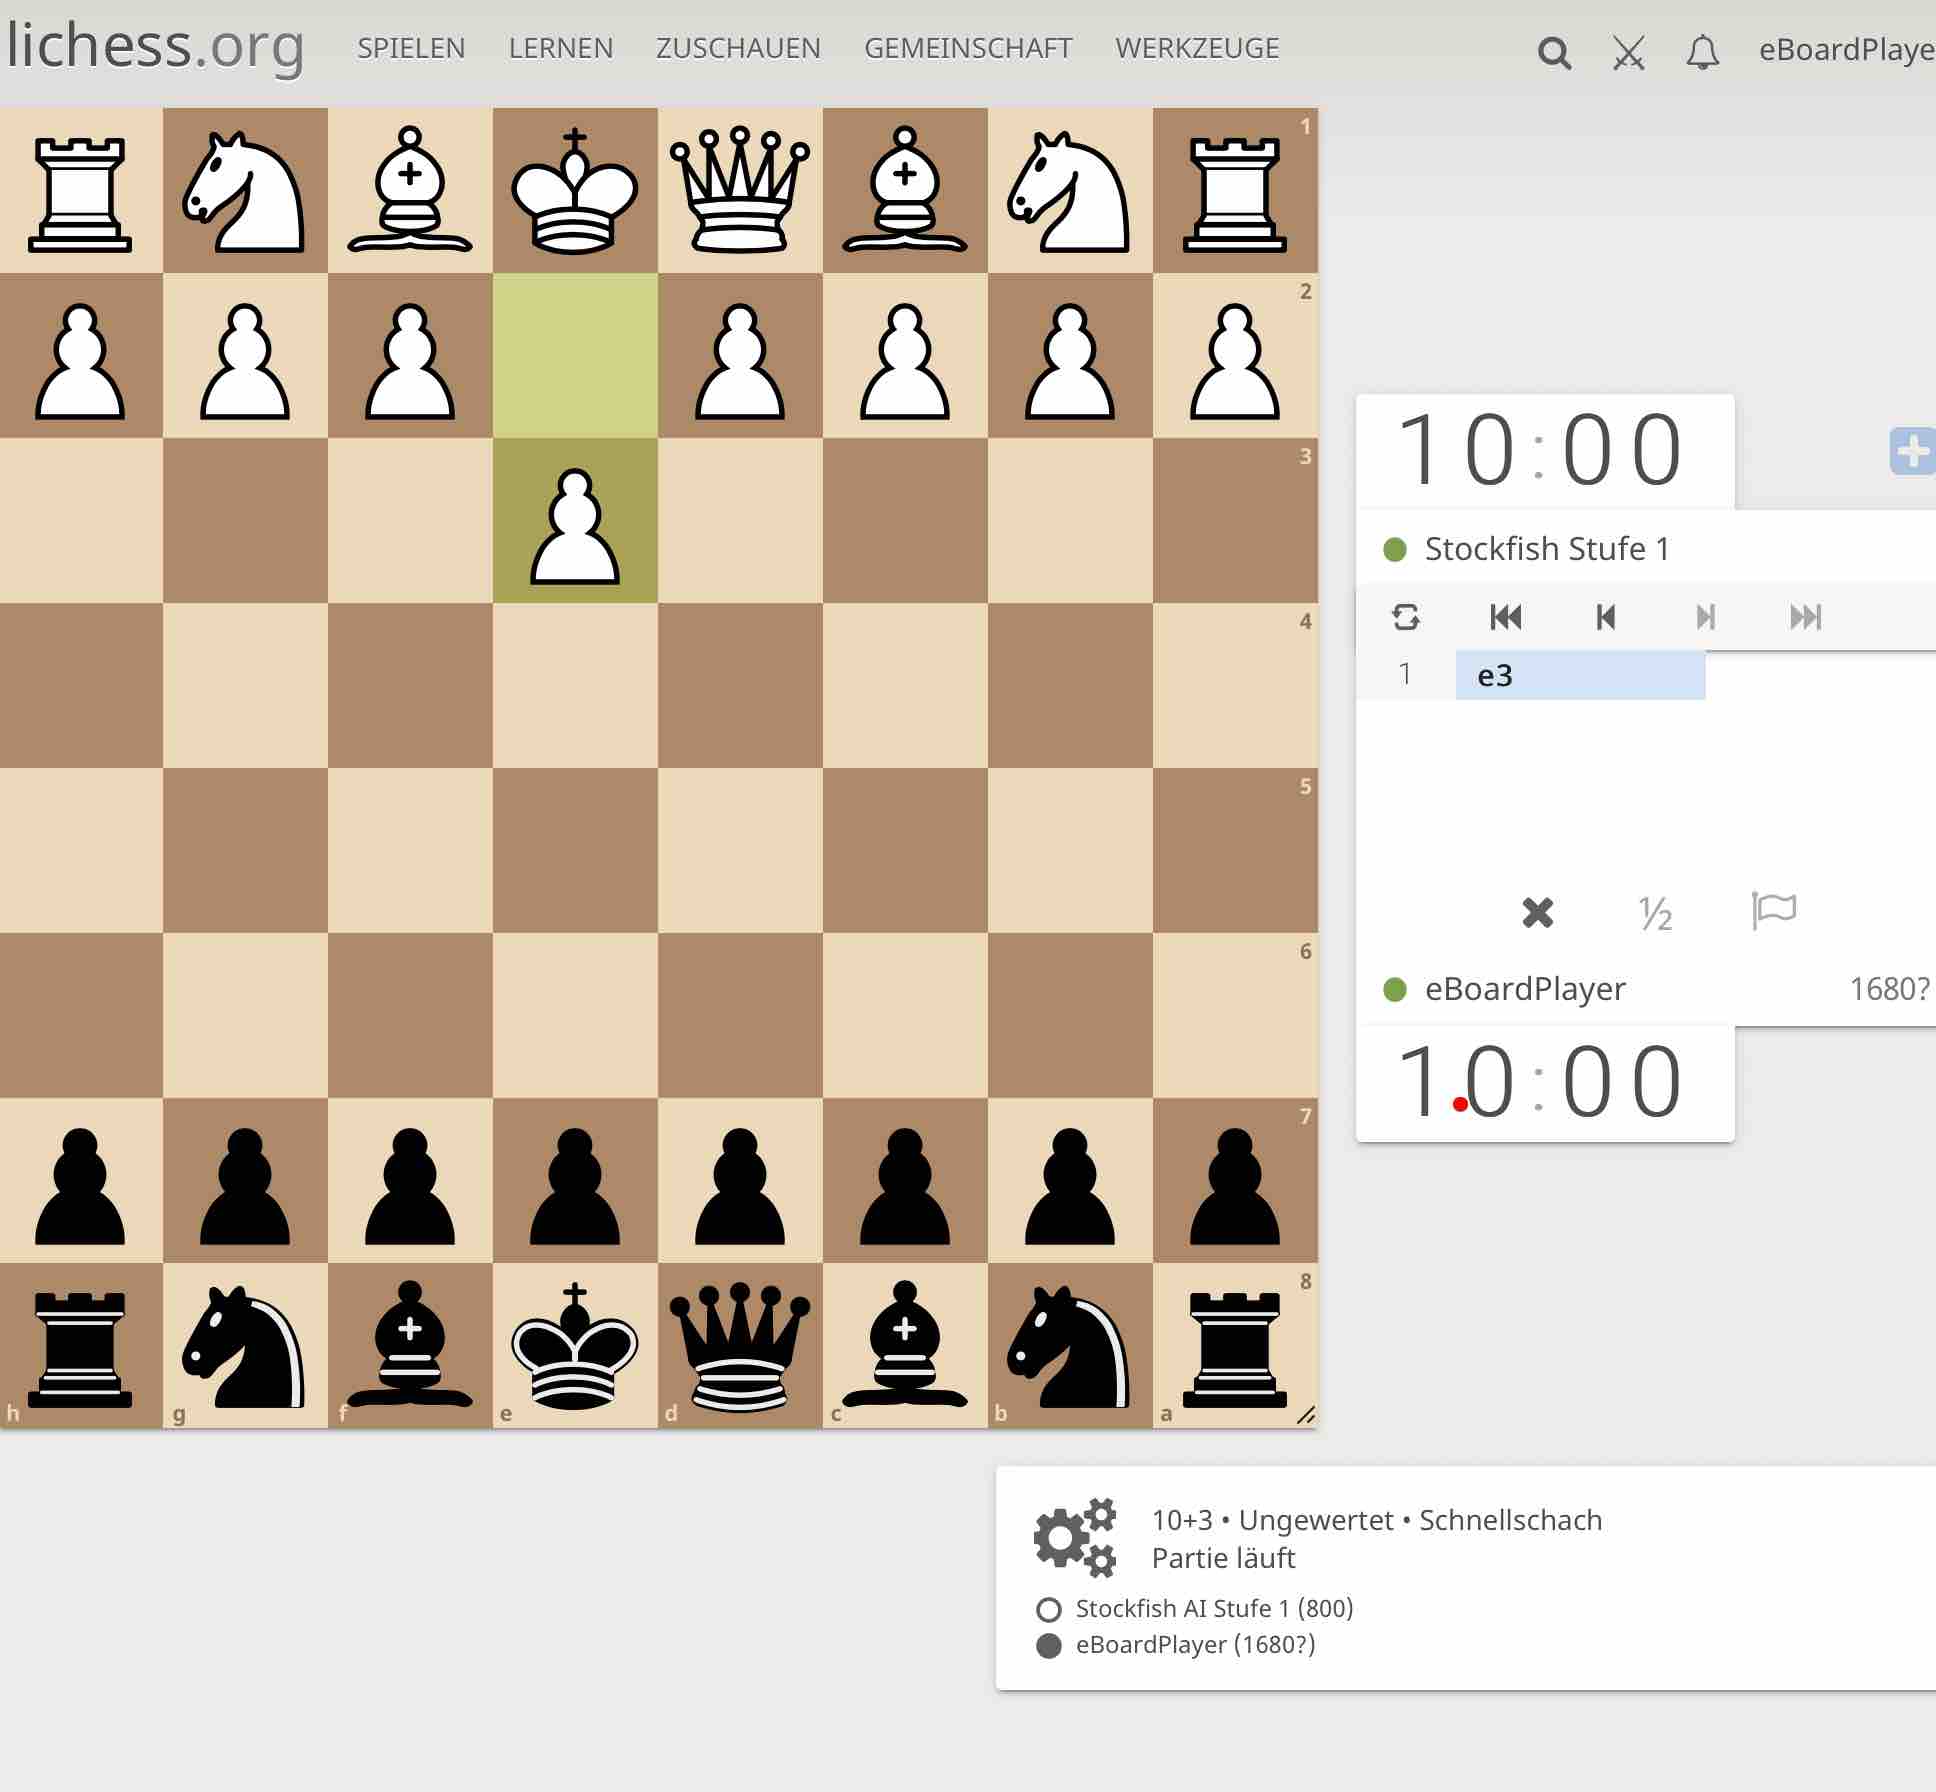 GitHub - rooklift/nibbler: Chess analysis GUI for UCI engines